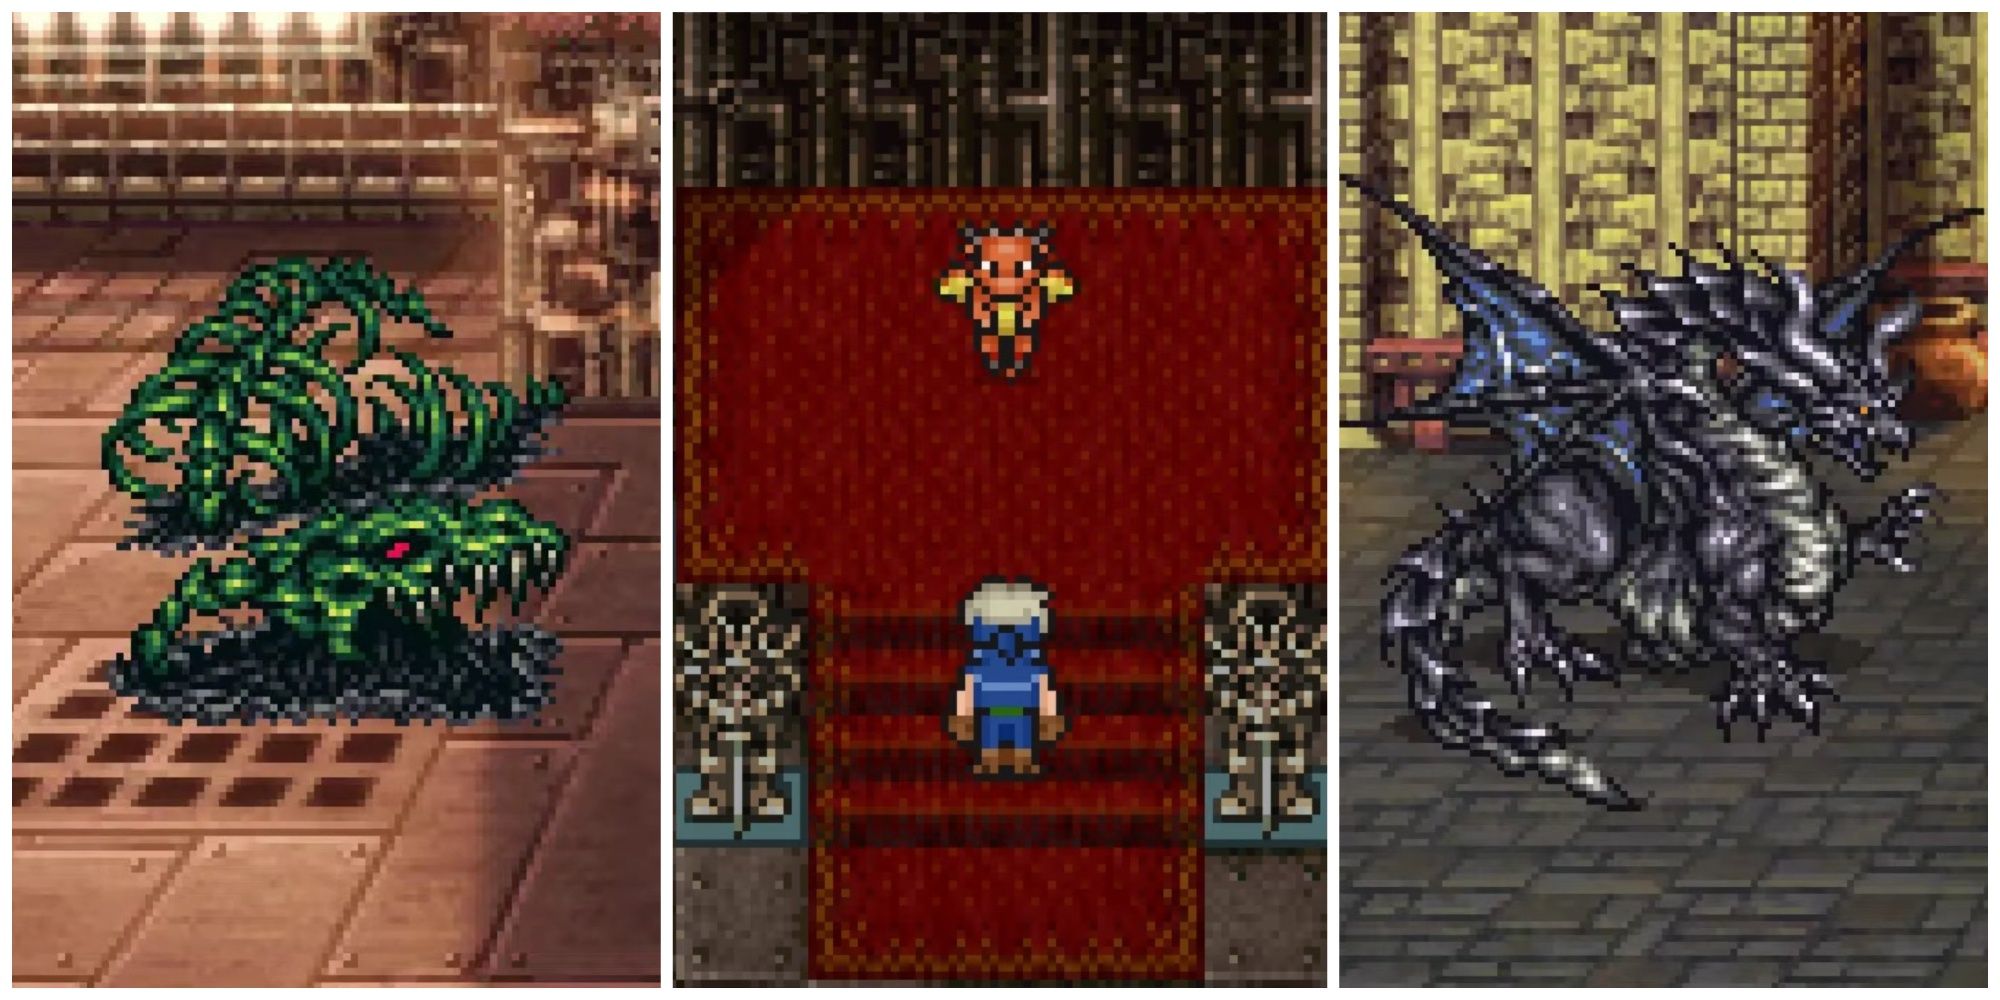 Finding the 8 Legendary Dragons in Final Fantasy 6